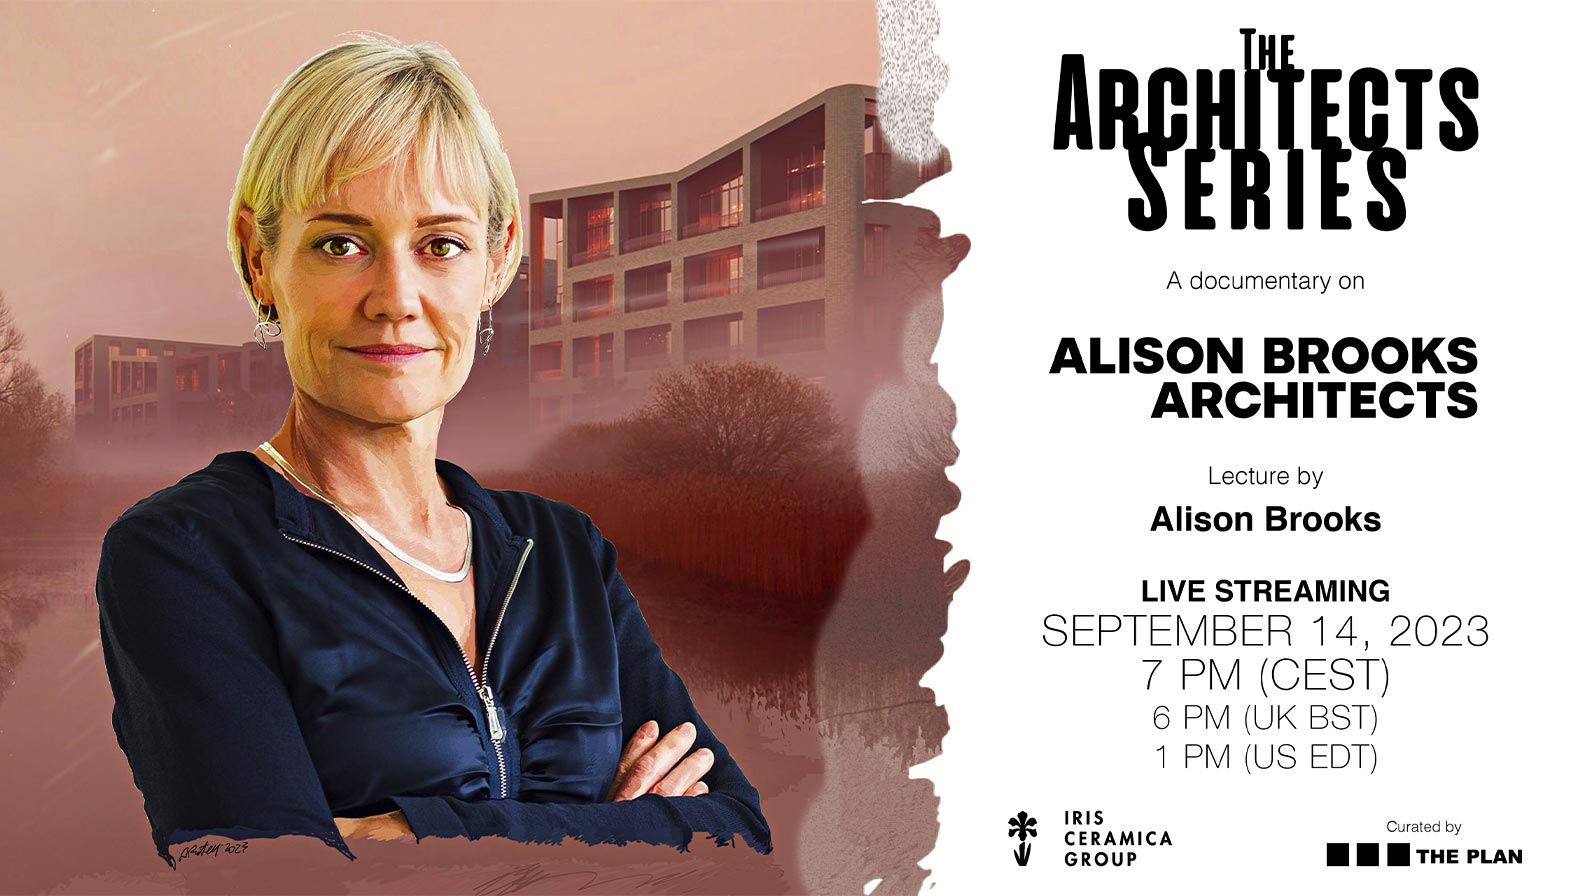 A holistic approach to architecture, Alison Brooks at The Architects Series
